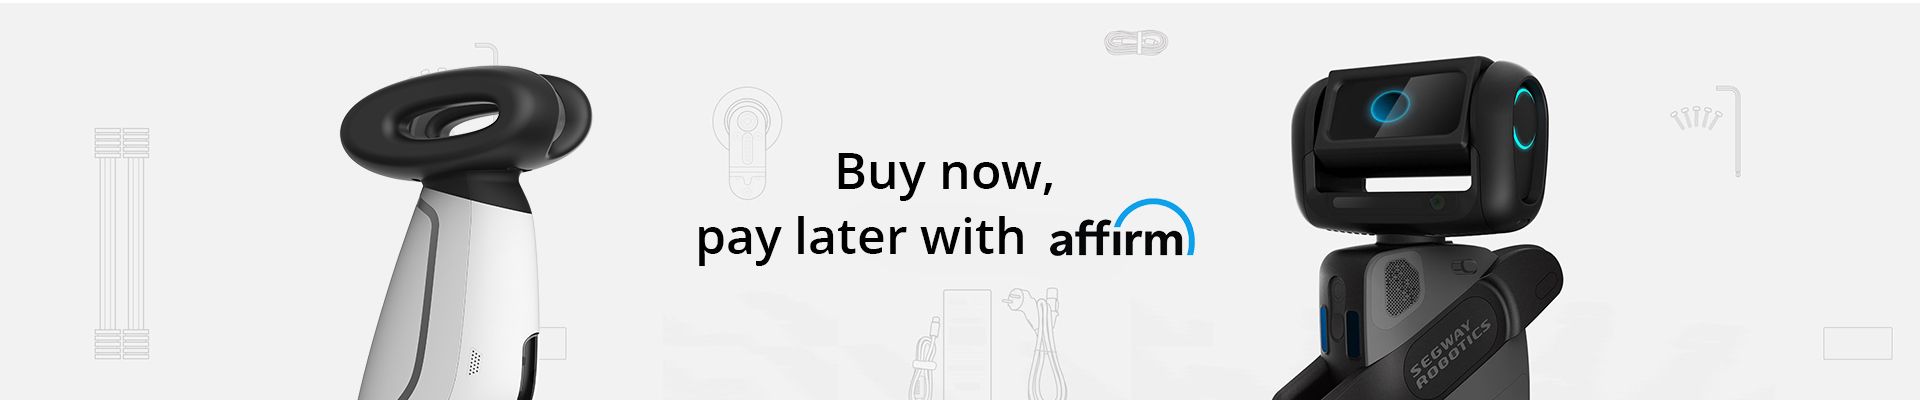 Affirm Segway Buy Now Pay Later